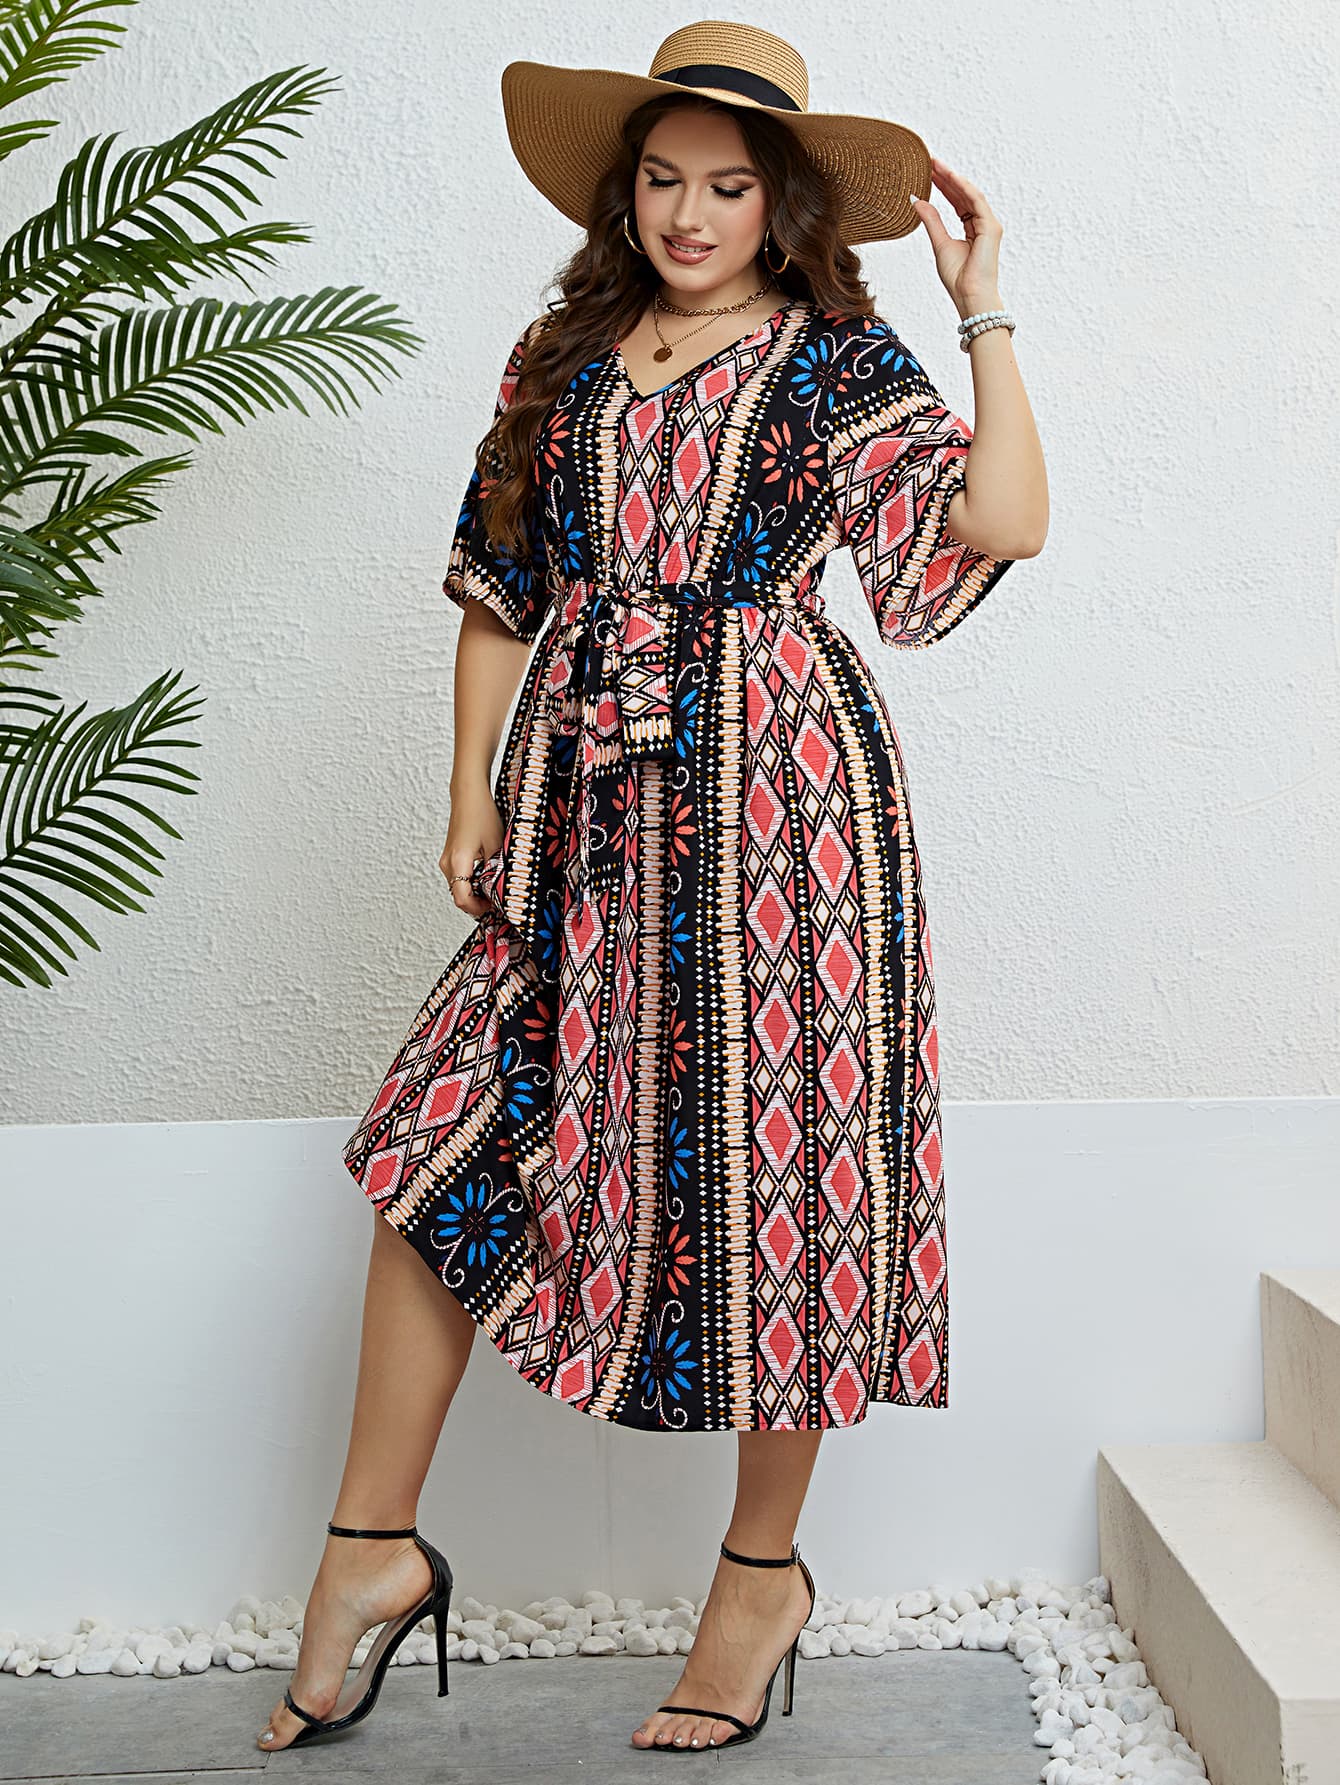 Eye-catching patterned plus-size dress with a flattering silhouette